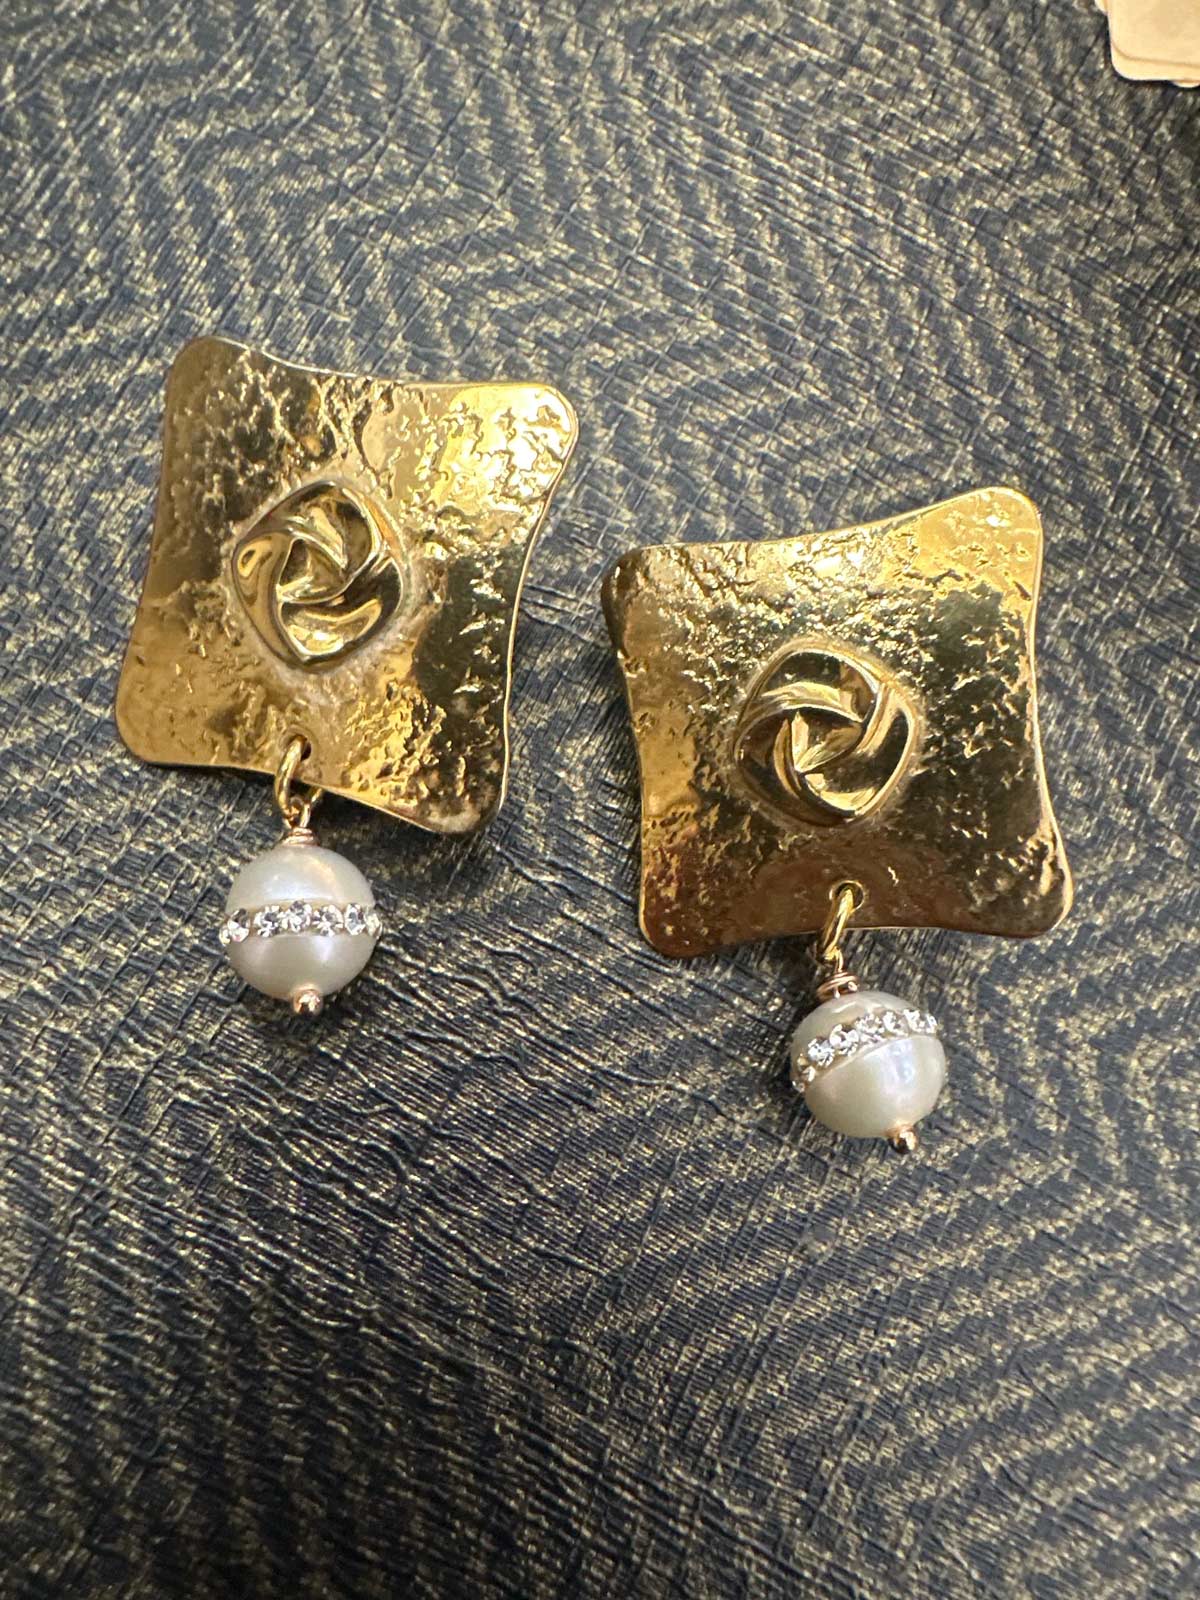 a pair of gold earrings with pearls